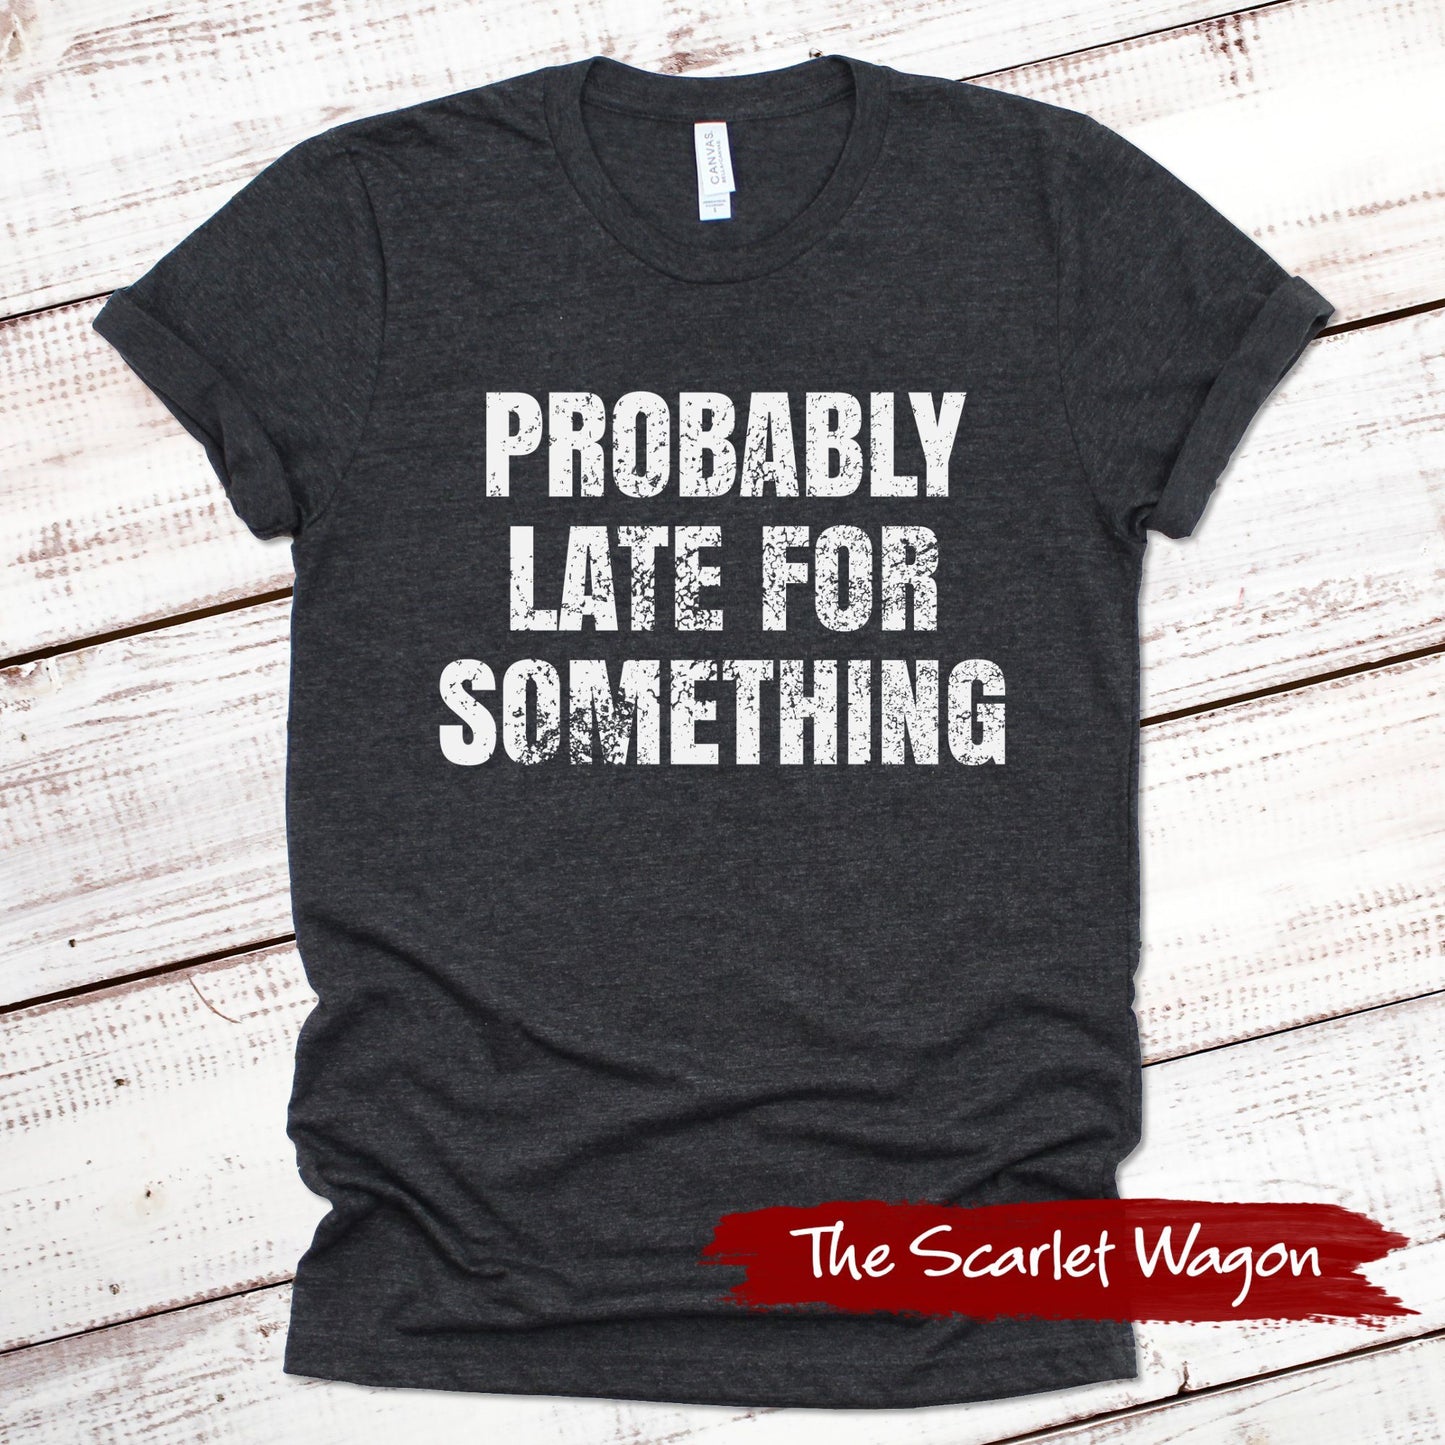 Probably Late for Something Funny Shirt Scarlet Wagon Dark Gray Heather XS 